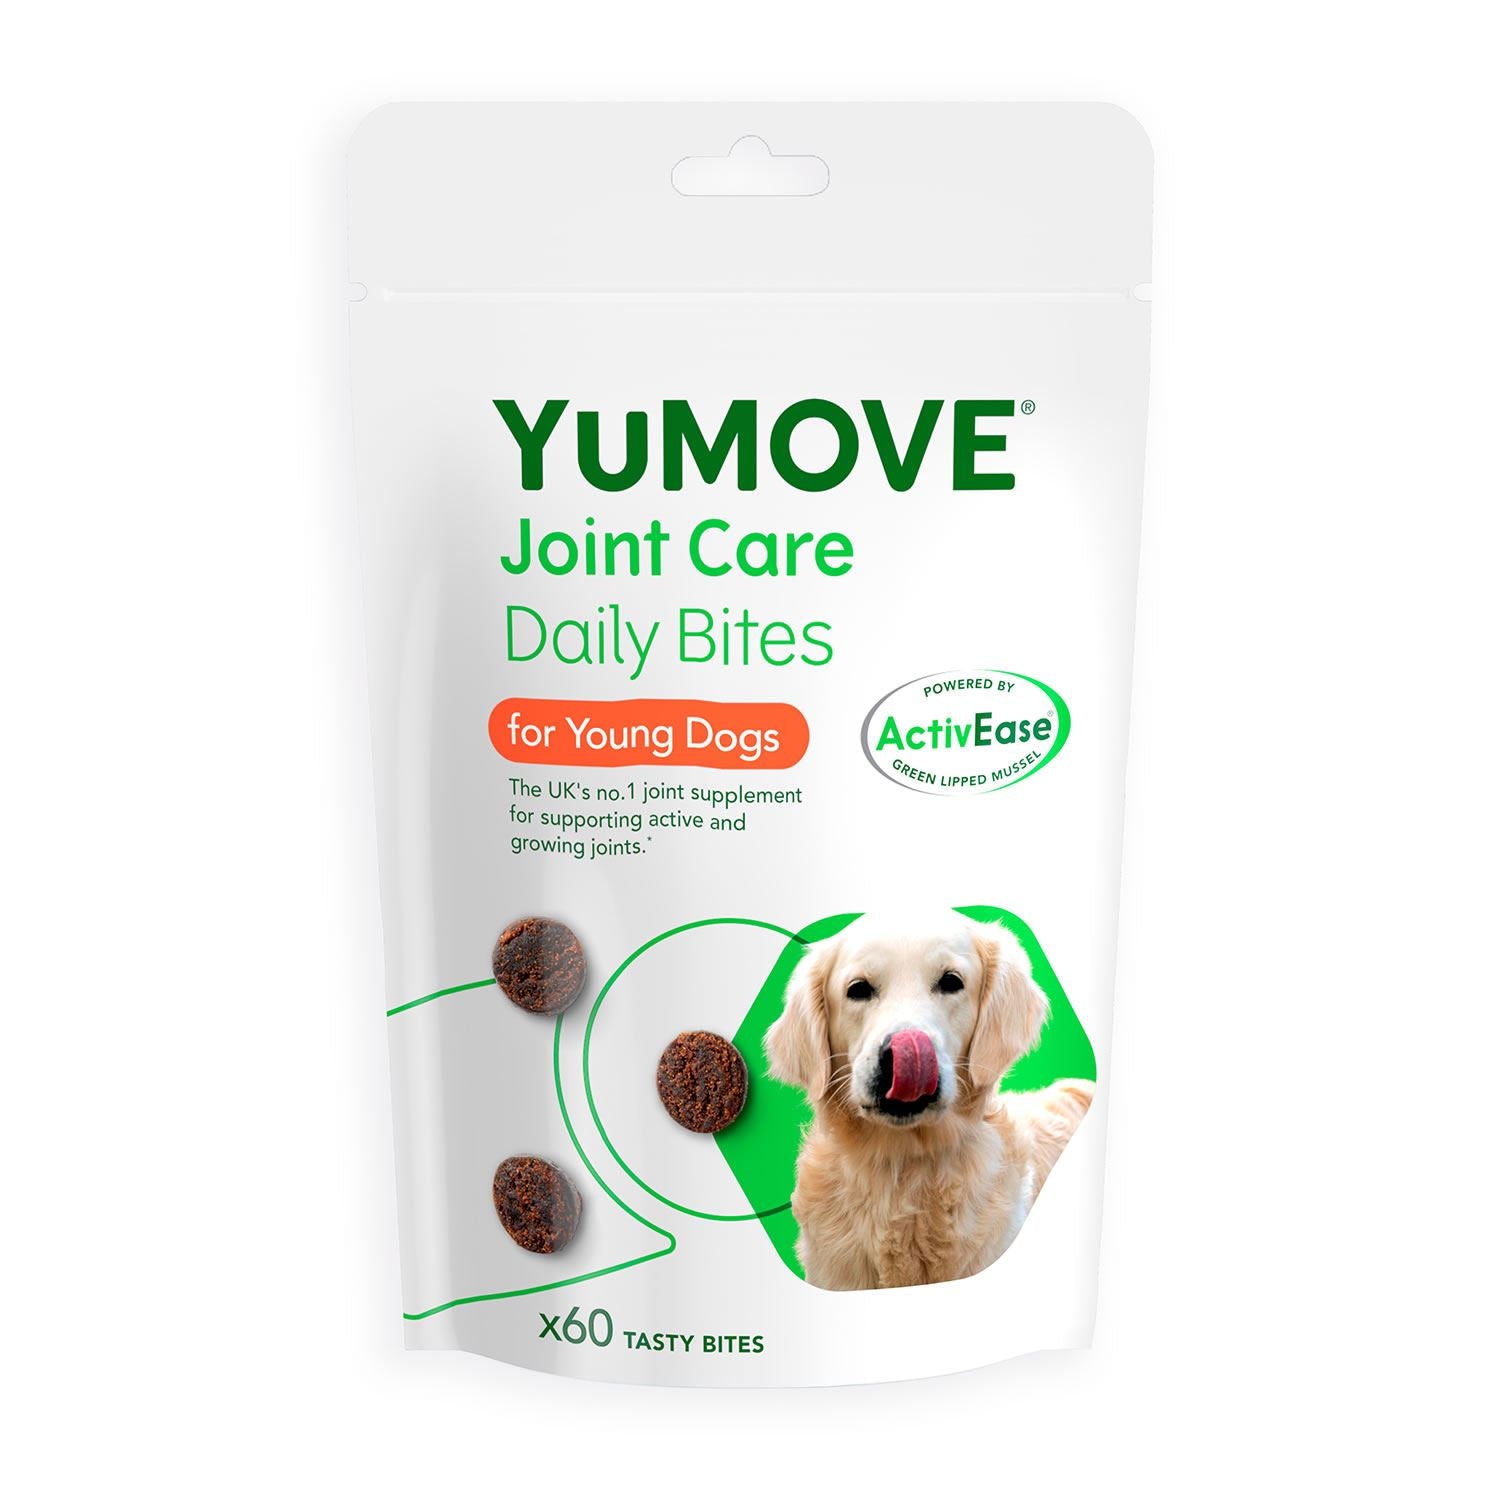 Yumove Joint Care Daily Bites For Young Dogs - Just Horse Riders